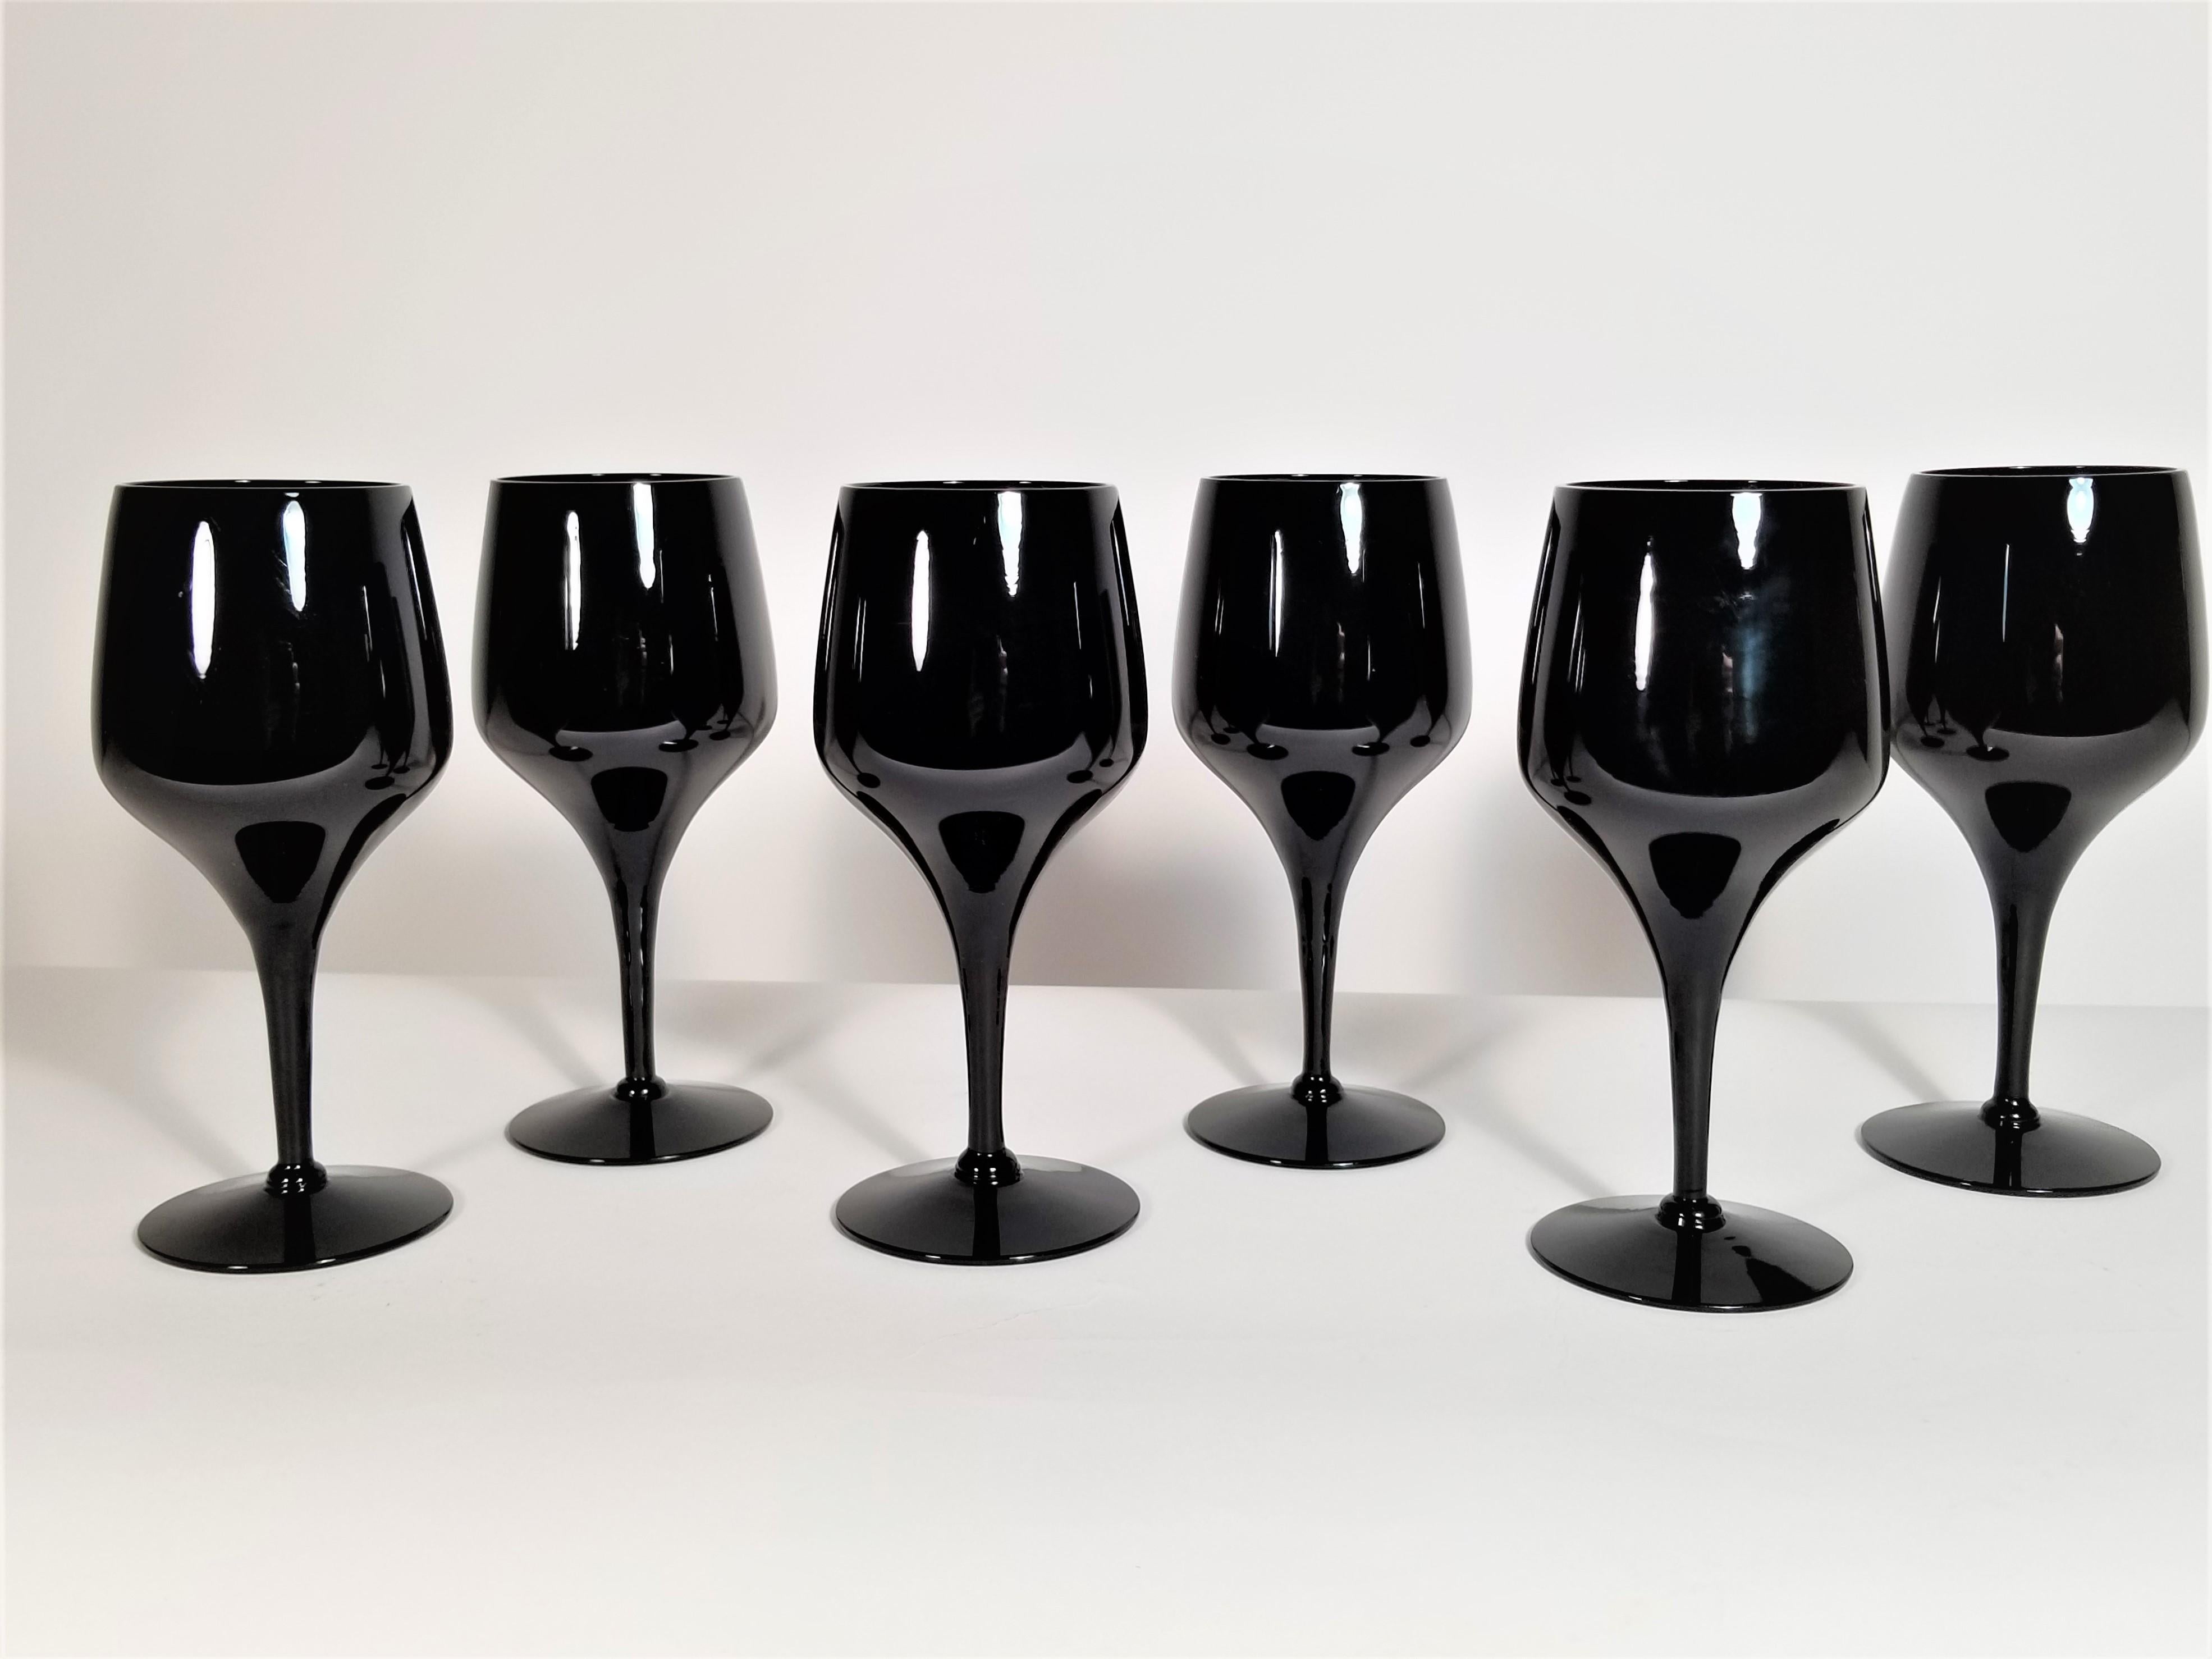 Black glass tulip 1970s 1980s midcentury silhouette. Set of six.
Excellent condition.